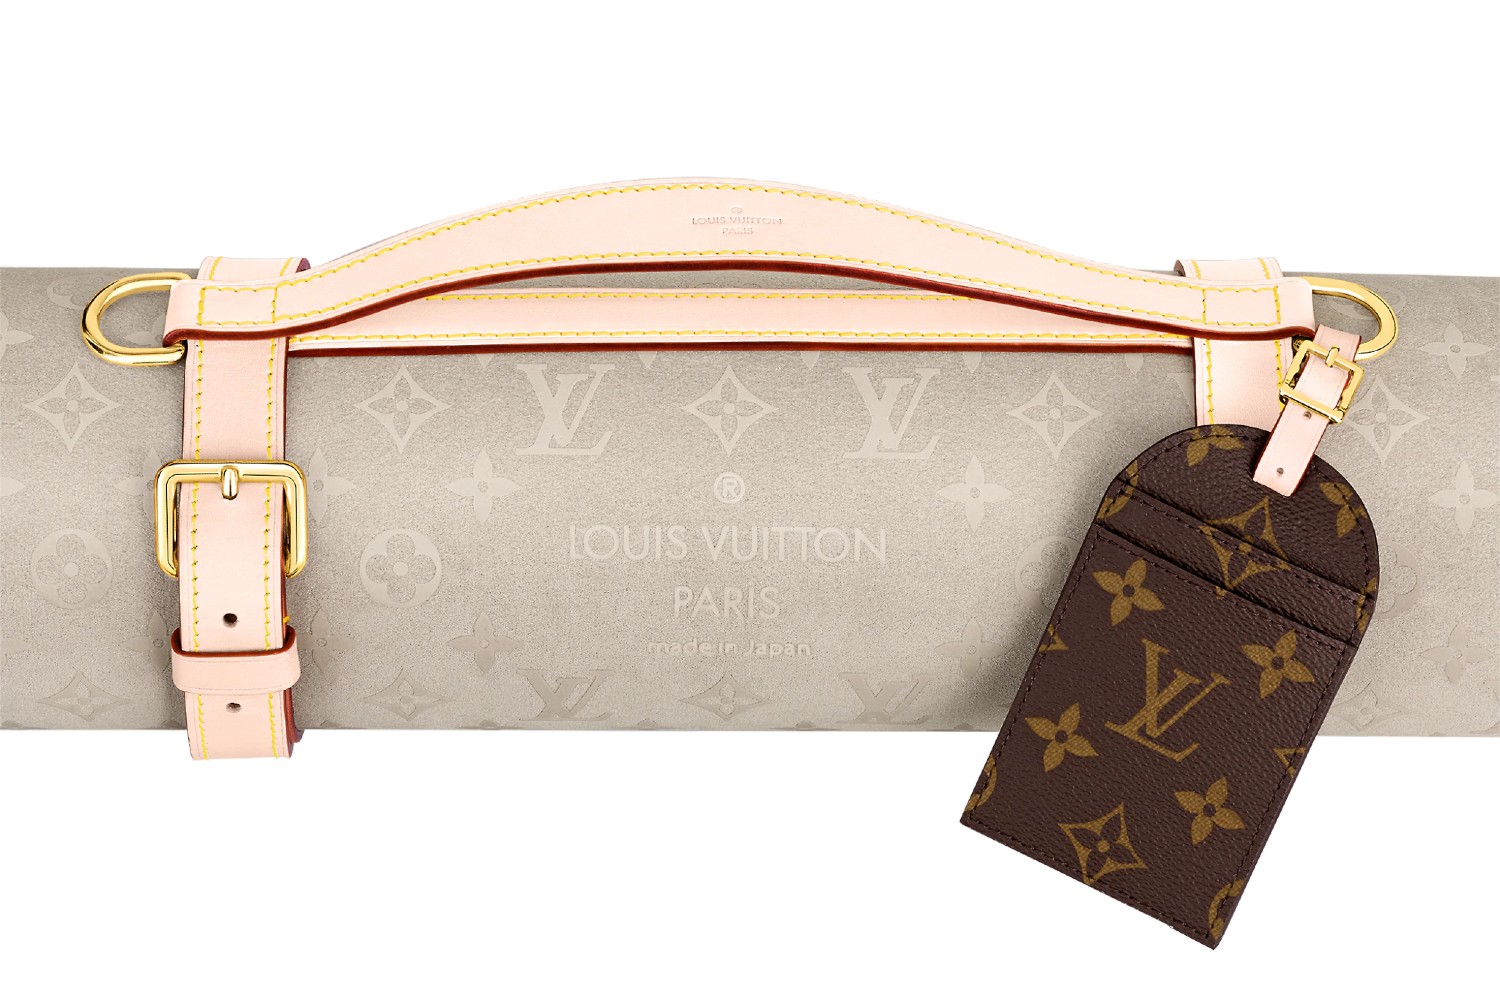 Cowhide Leather Louis Vuitton Yoga Mat Sparks Controversy Insidehook